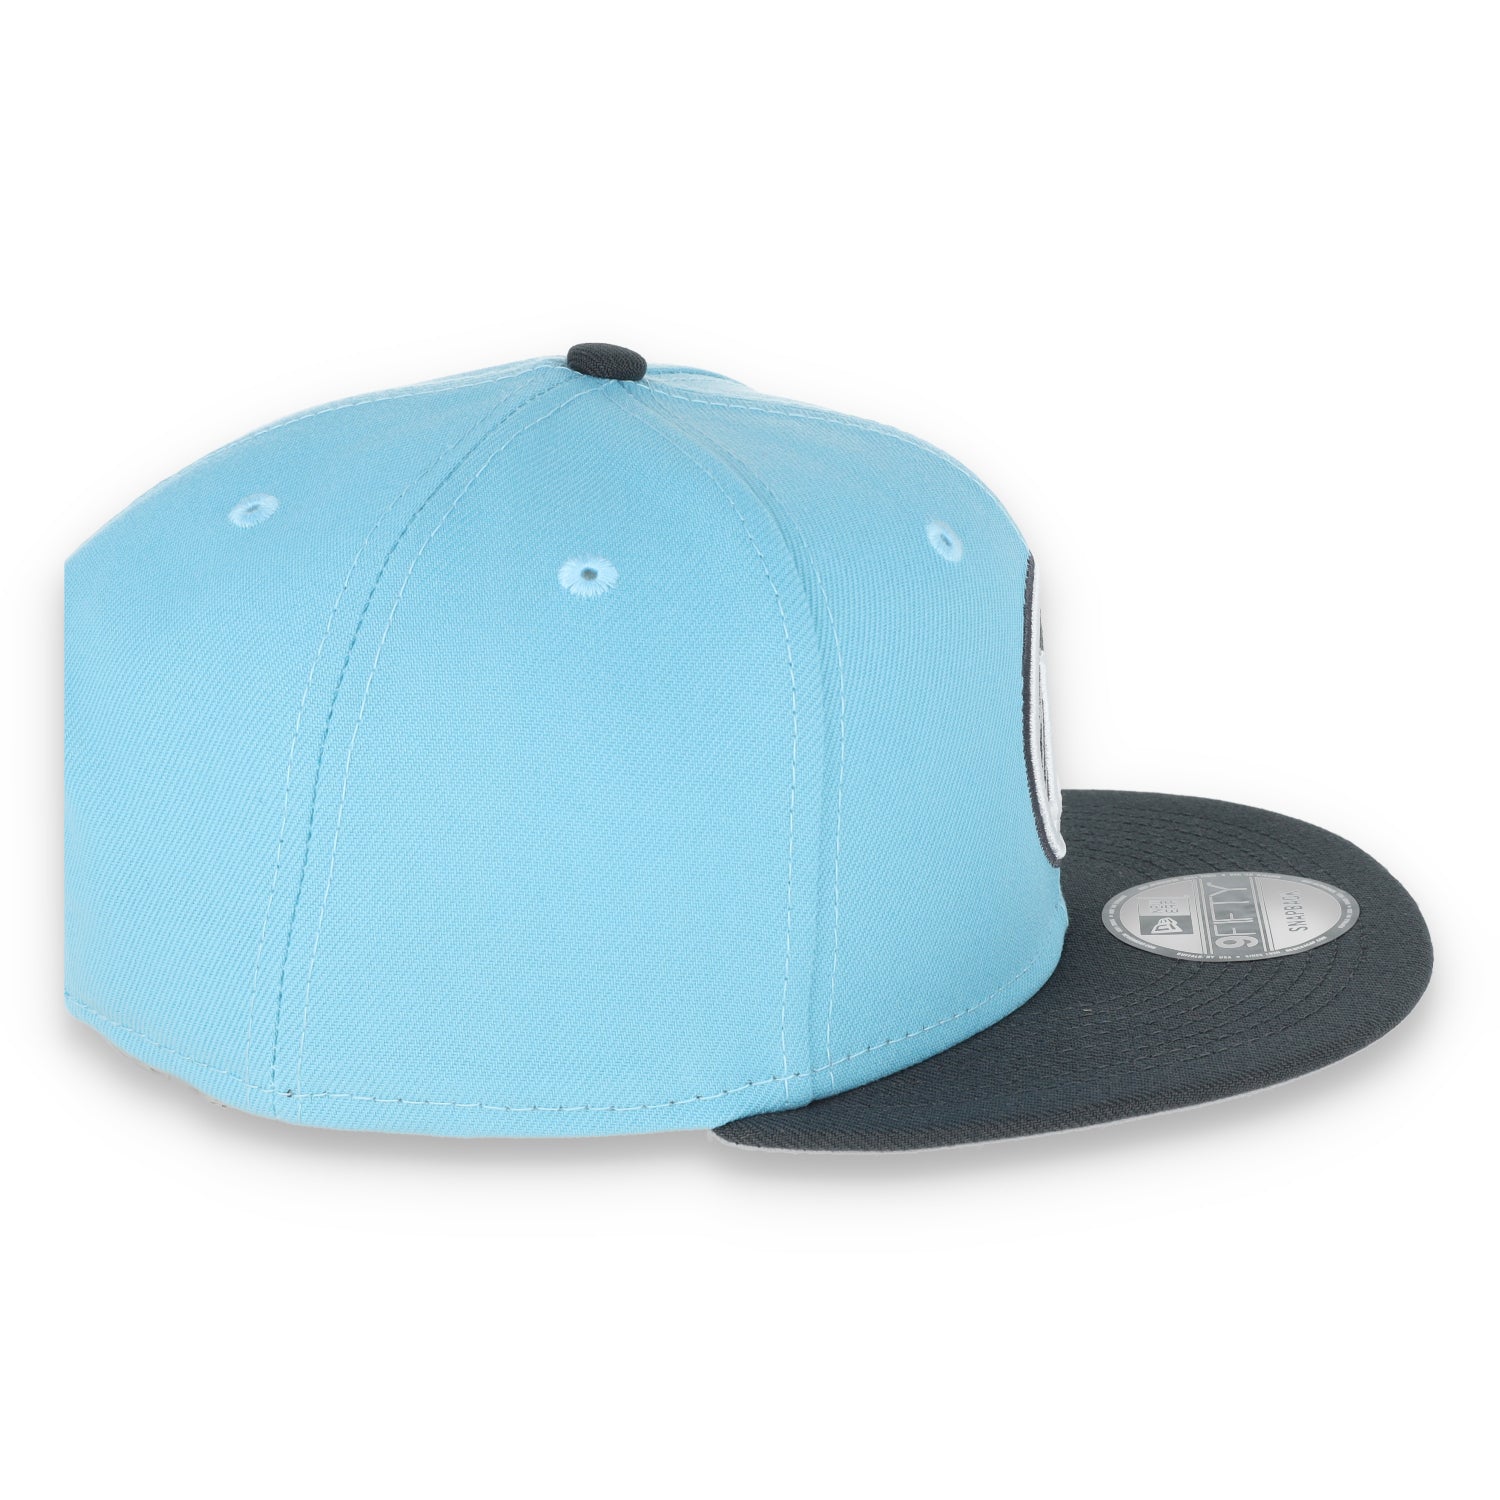 New Era Golden State Warriors Color Pack 2-Tone 9FIFTY Snapback Hat-BABYBLUE/GREY